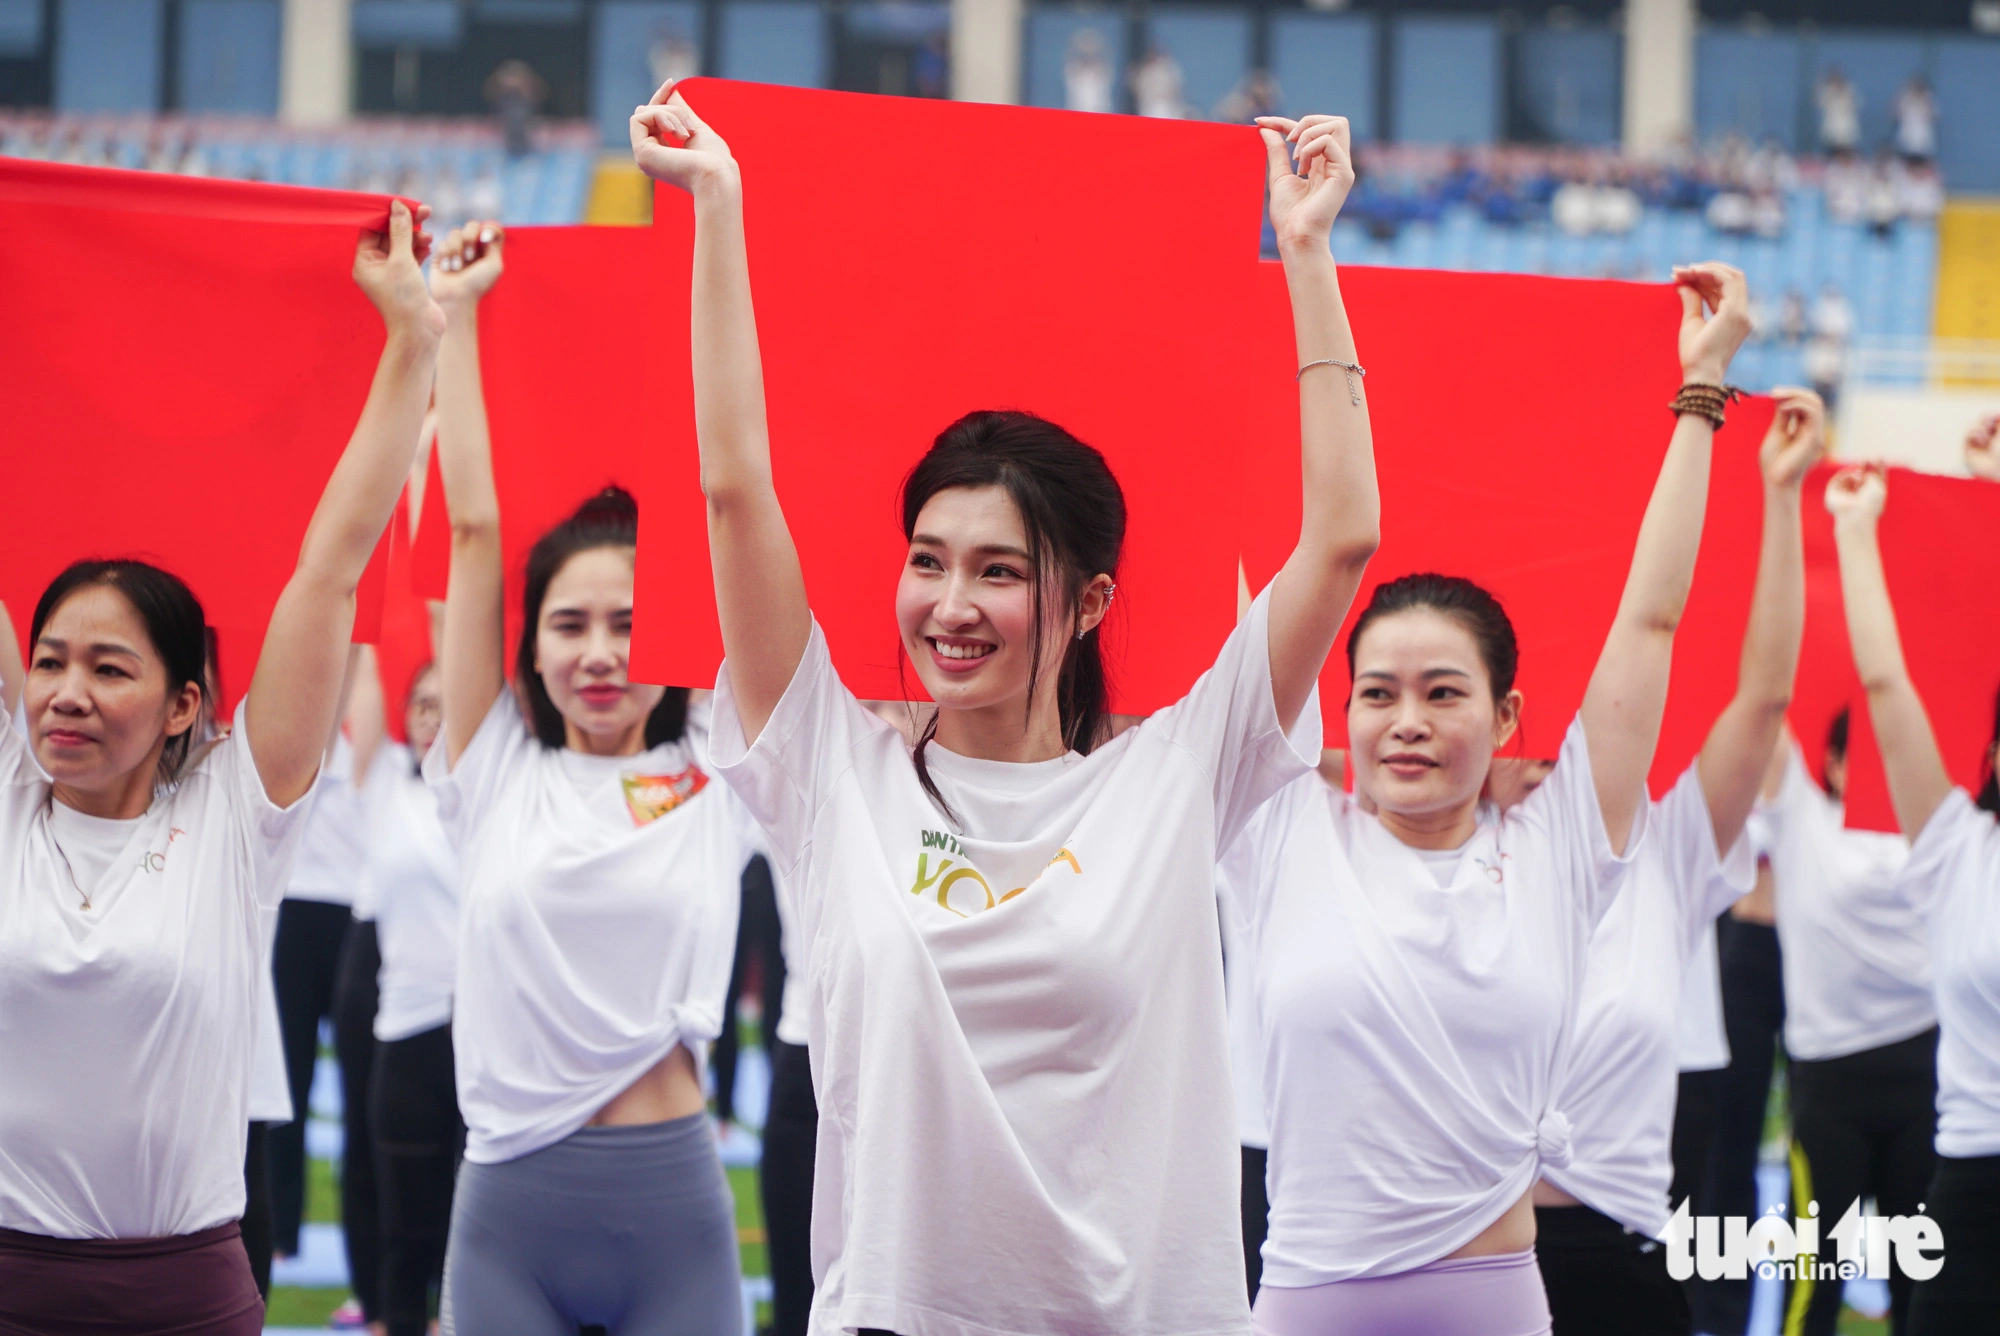 Runner-up Phuong Nhi is proud to be one of 5,000 people participating in the making of the national flag to achieve a Vietnamese record - Photo: Nguyen Hien